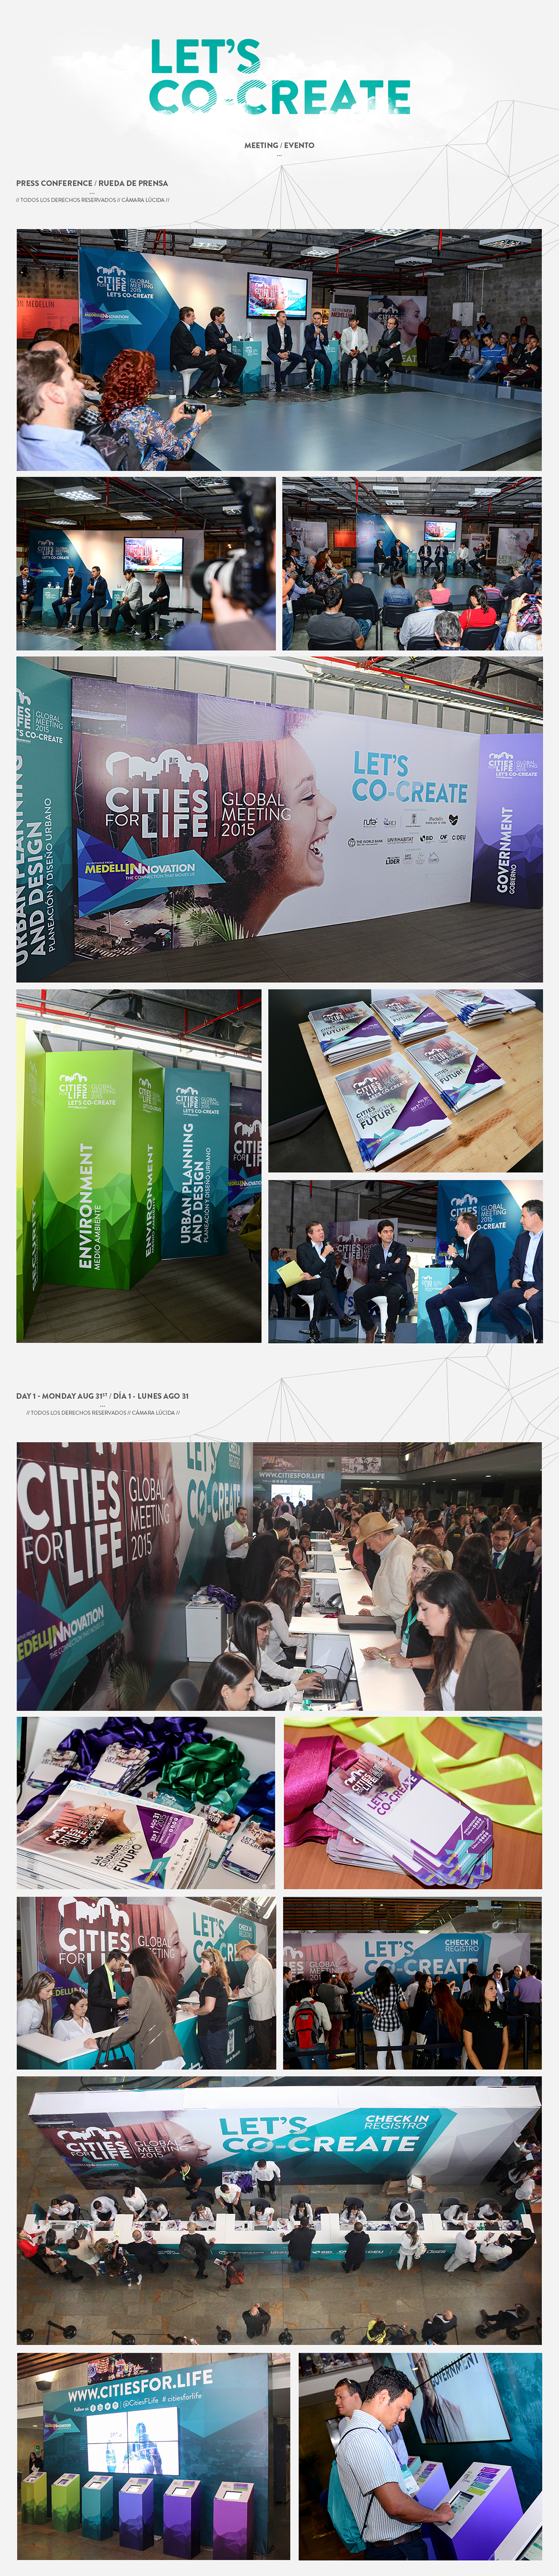 medellin colombia Cities life meeting Event innovation cocreation major alcaldes FORO Urban development environment